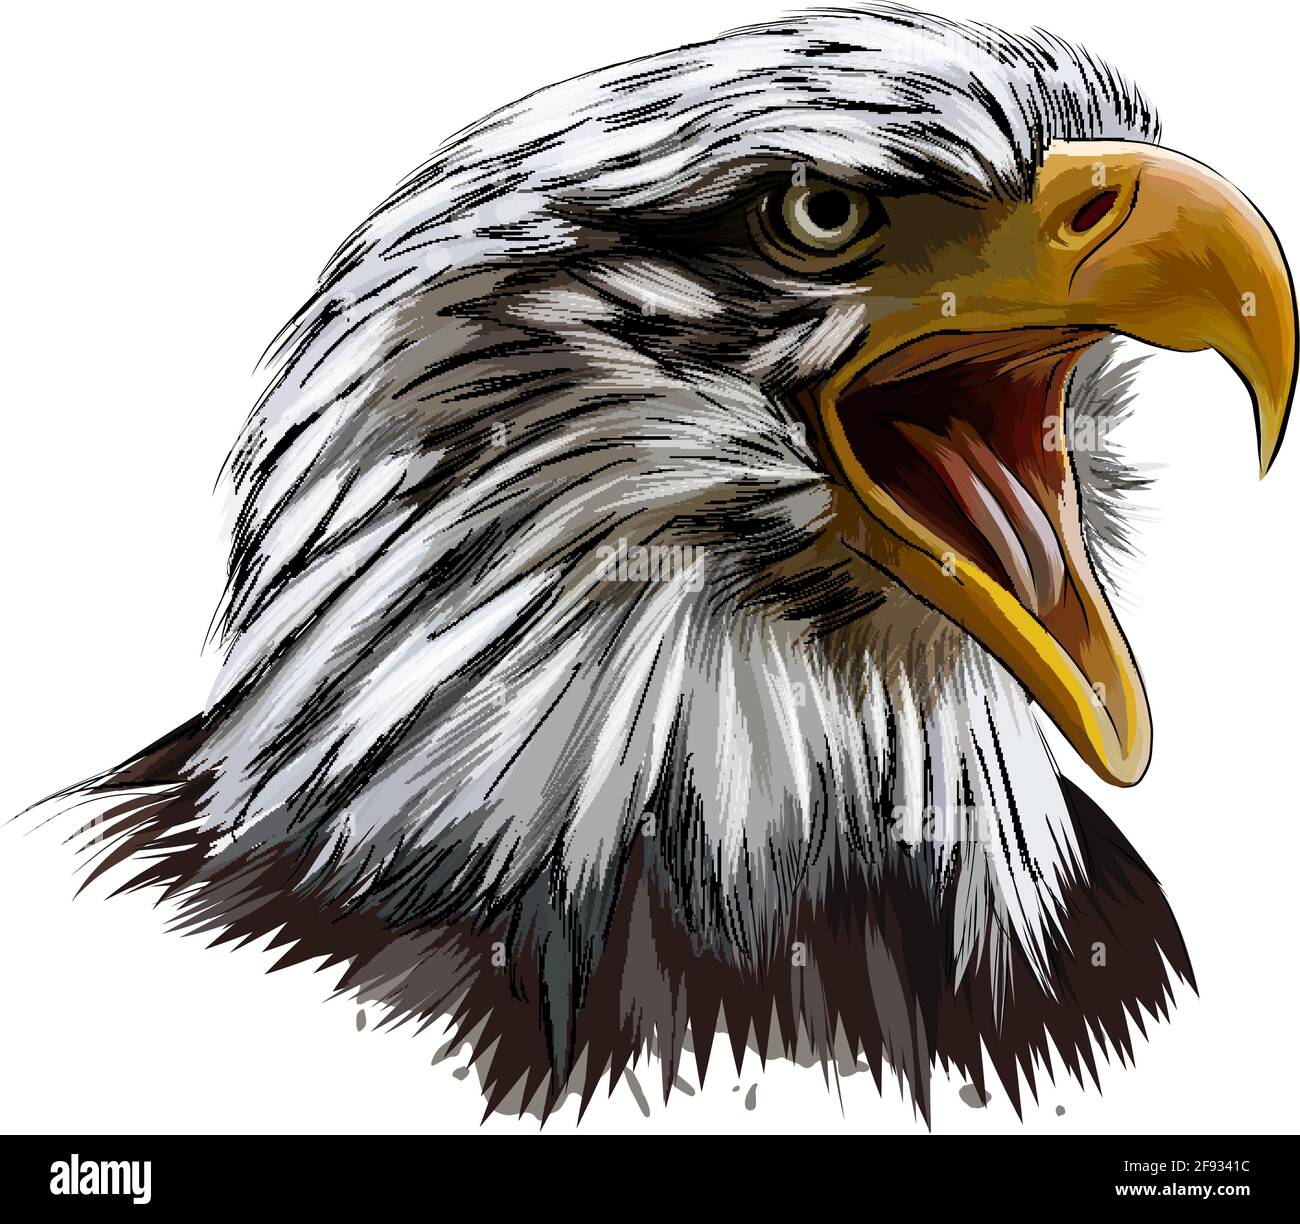 Bald eagle head portrait from a splash of watercolor, colored